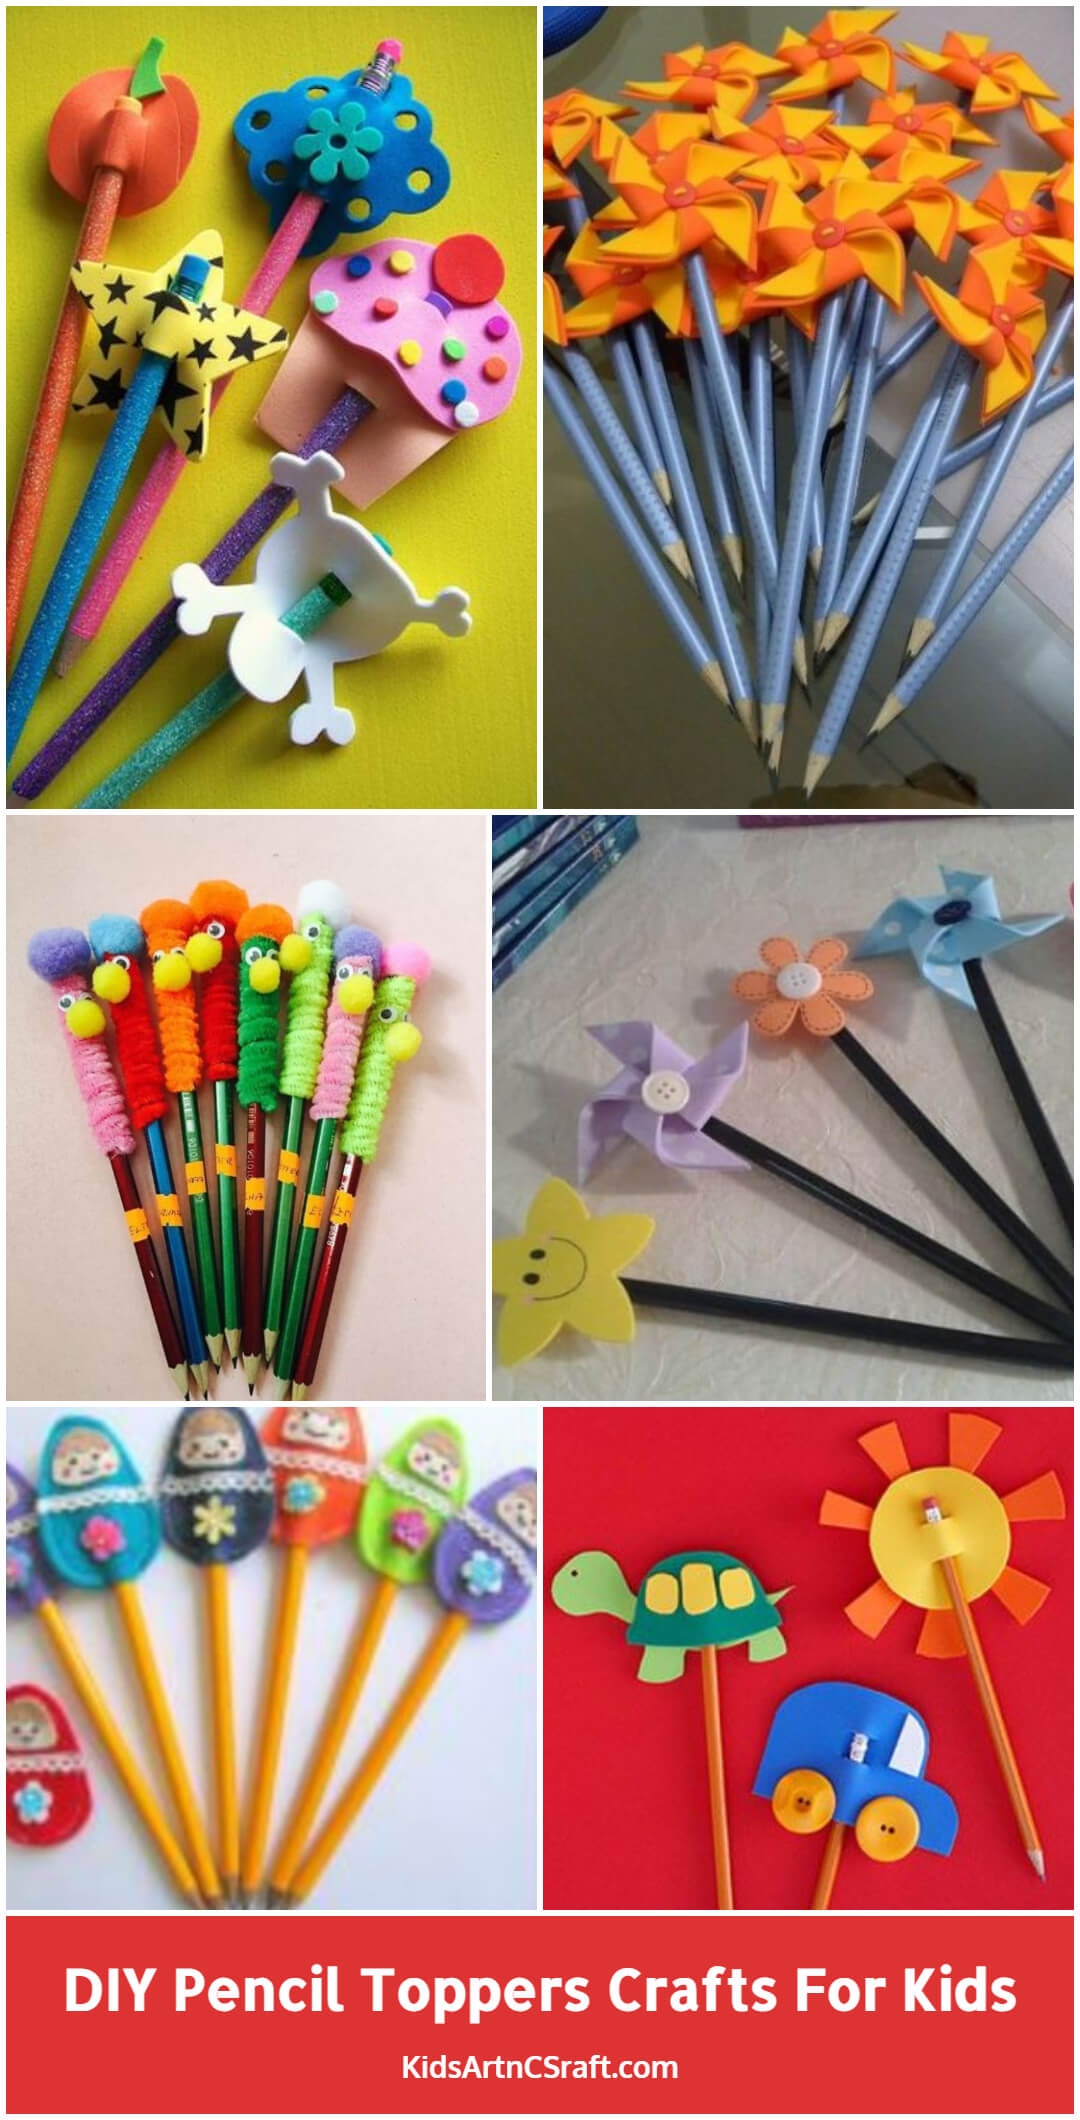 How to Make Easy DIY Pencil Toppers Craft Ideas